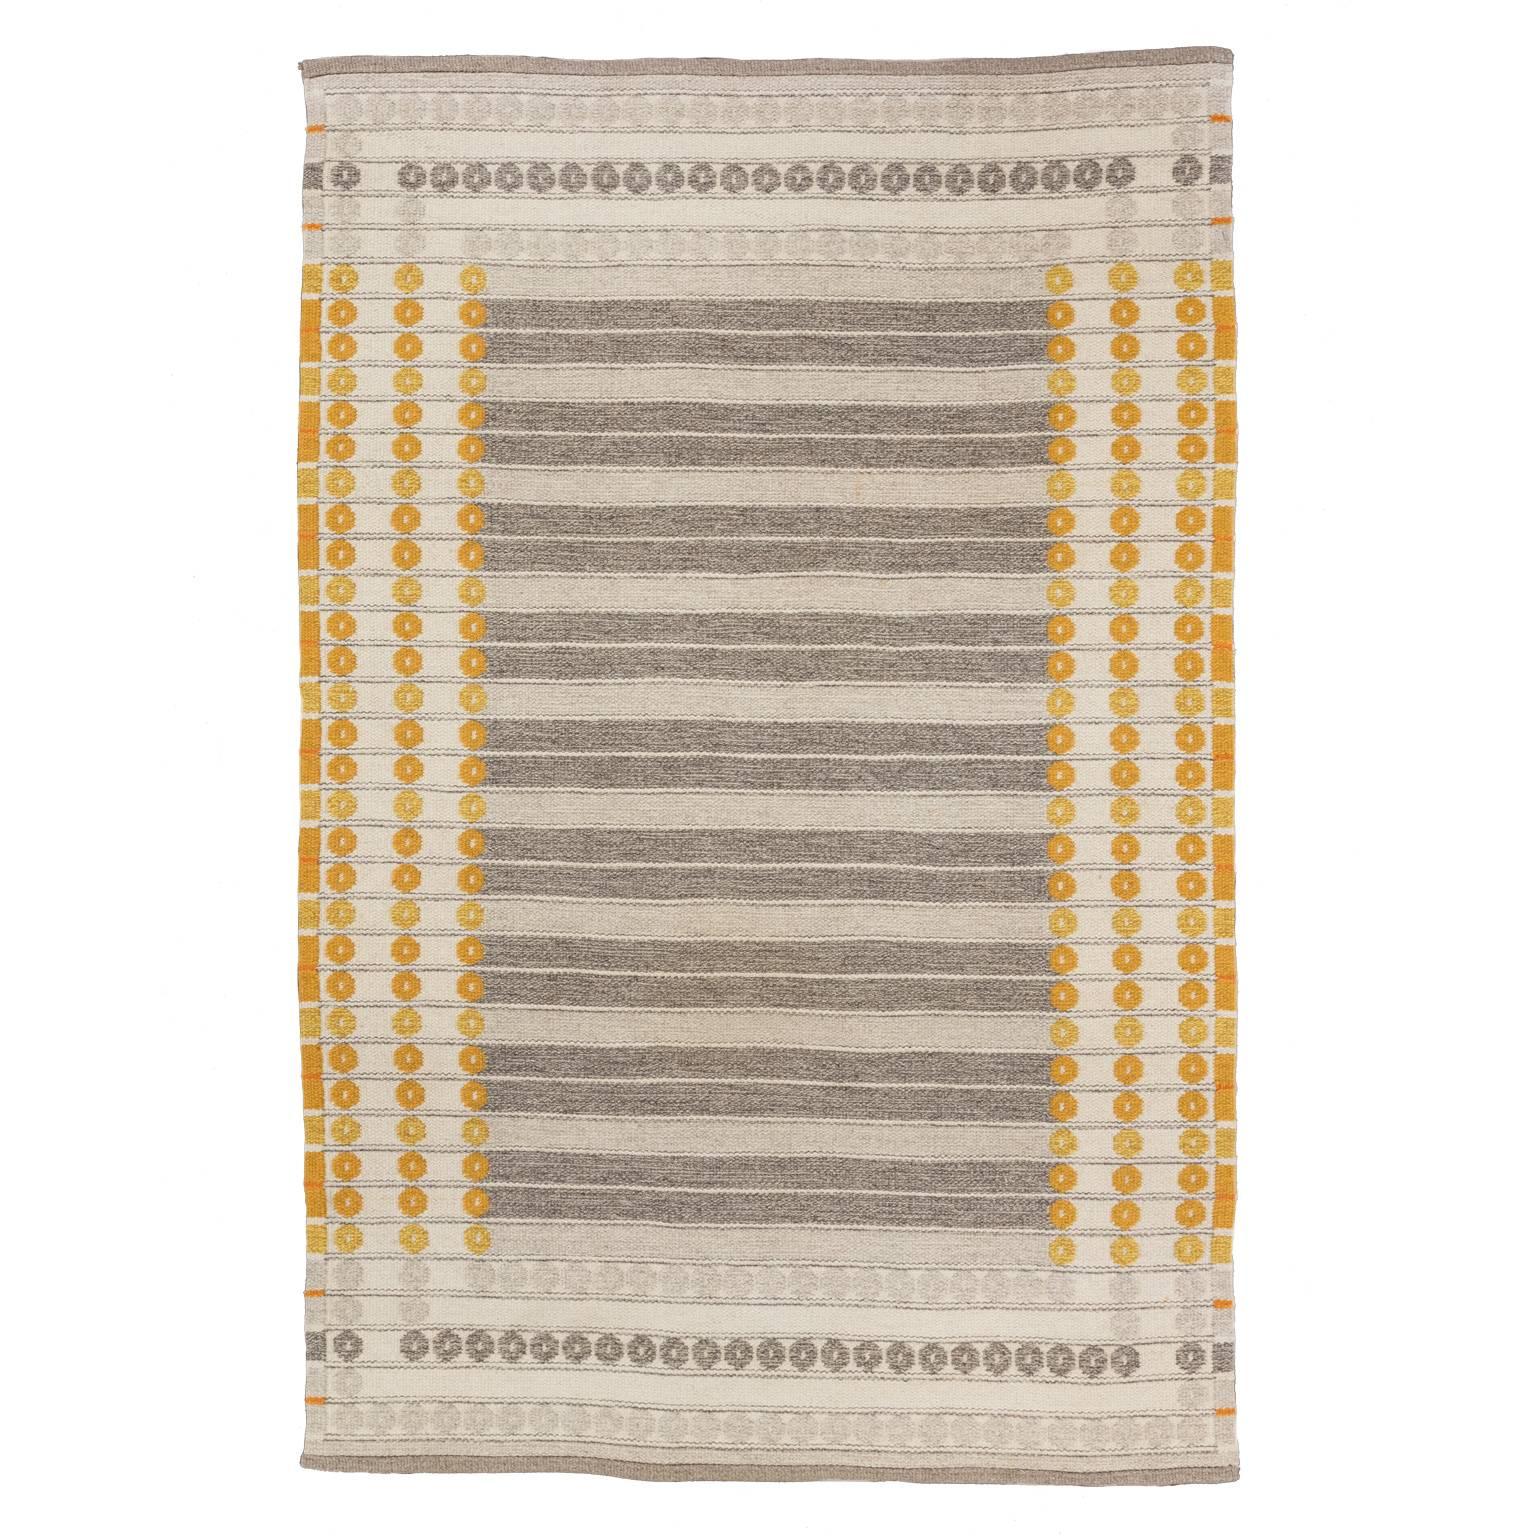 Sunny and inviting vintage double sided Swedish Kelim rug by Ingrid Dessau designed for Kasthall. Signed ID. Like many exquisite vintage Swedish kilims, this beautiful vintage rug is designed to use minimal colors and forms to create a more abstract